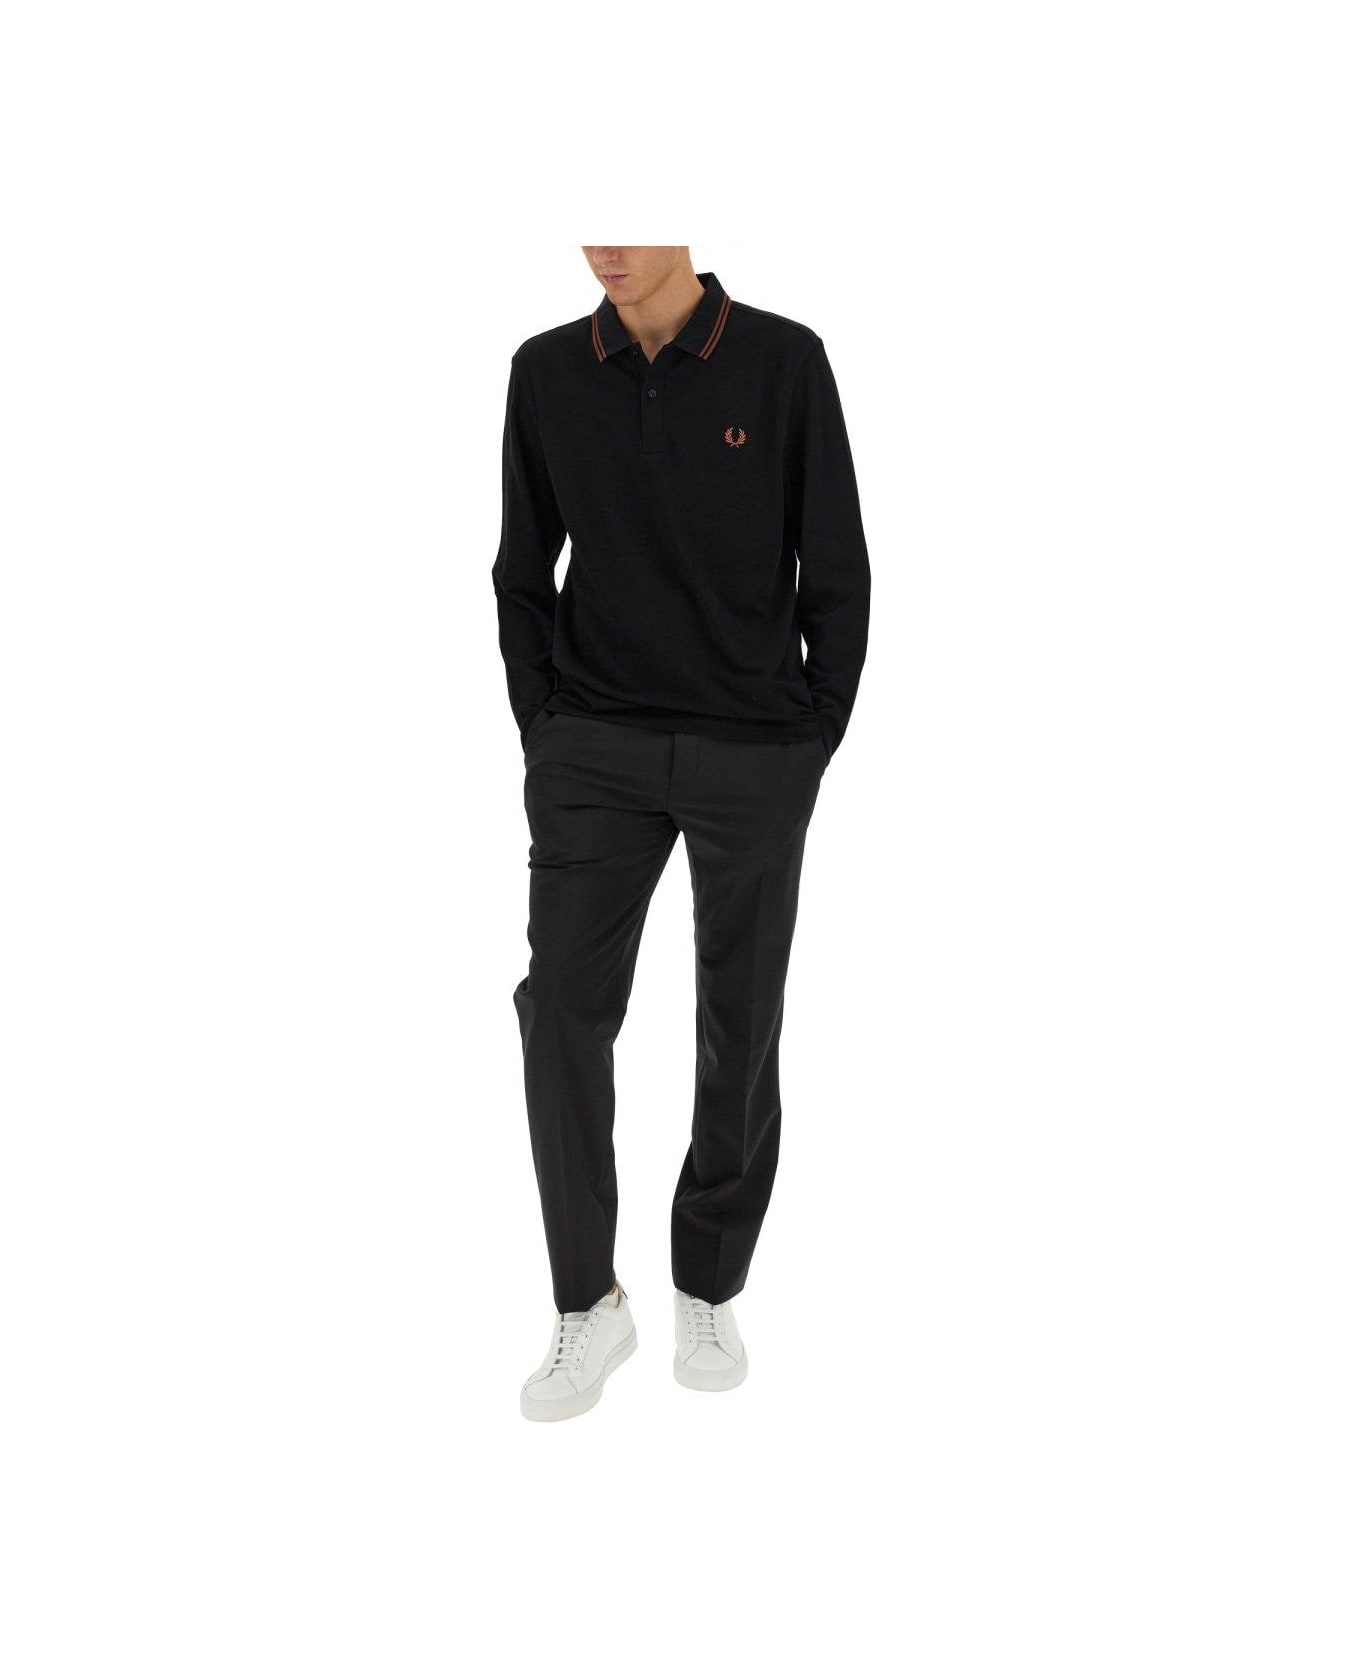 Fred Perry Logo Embroidered Polo Shirt - Black/whiskybrwn